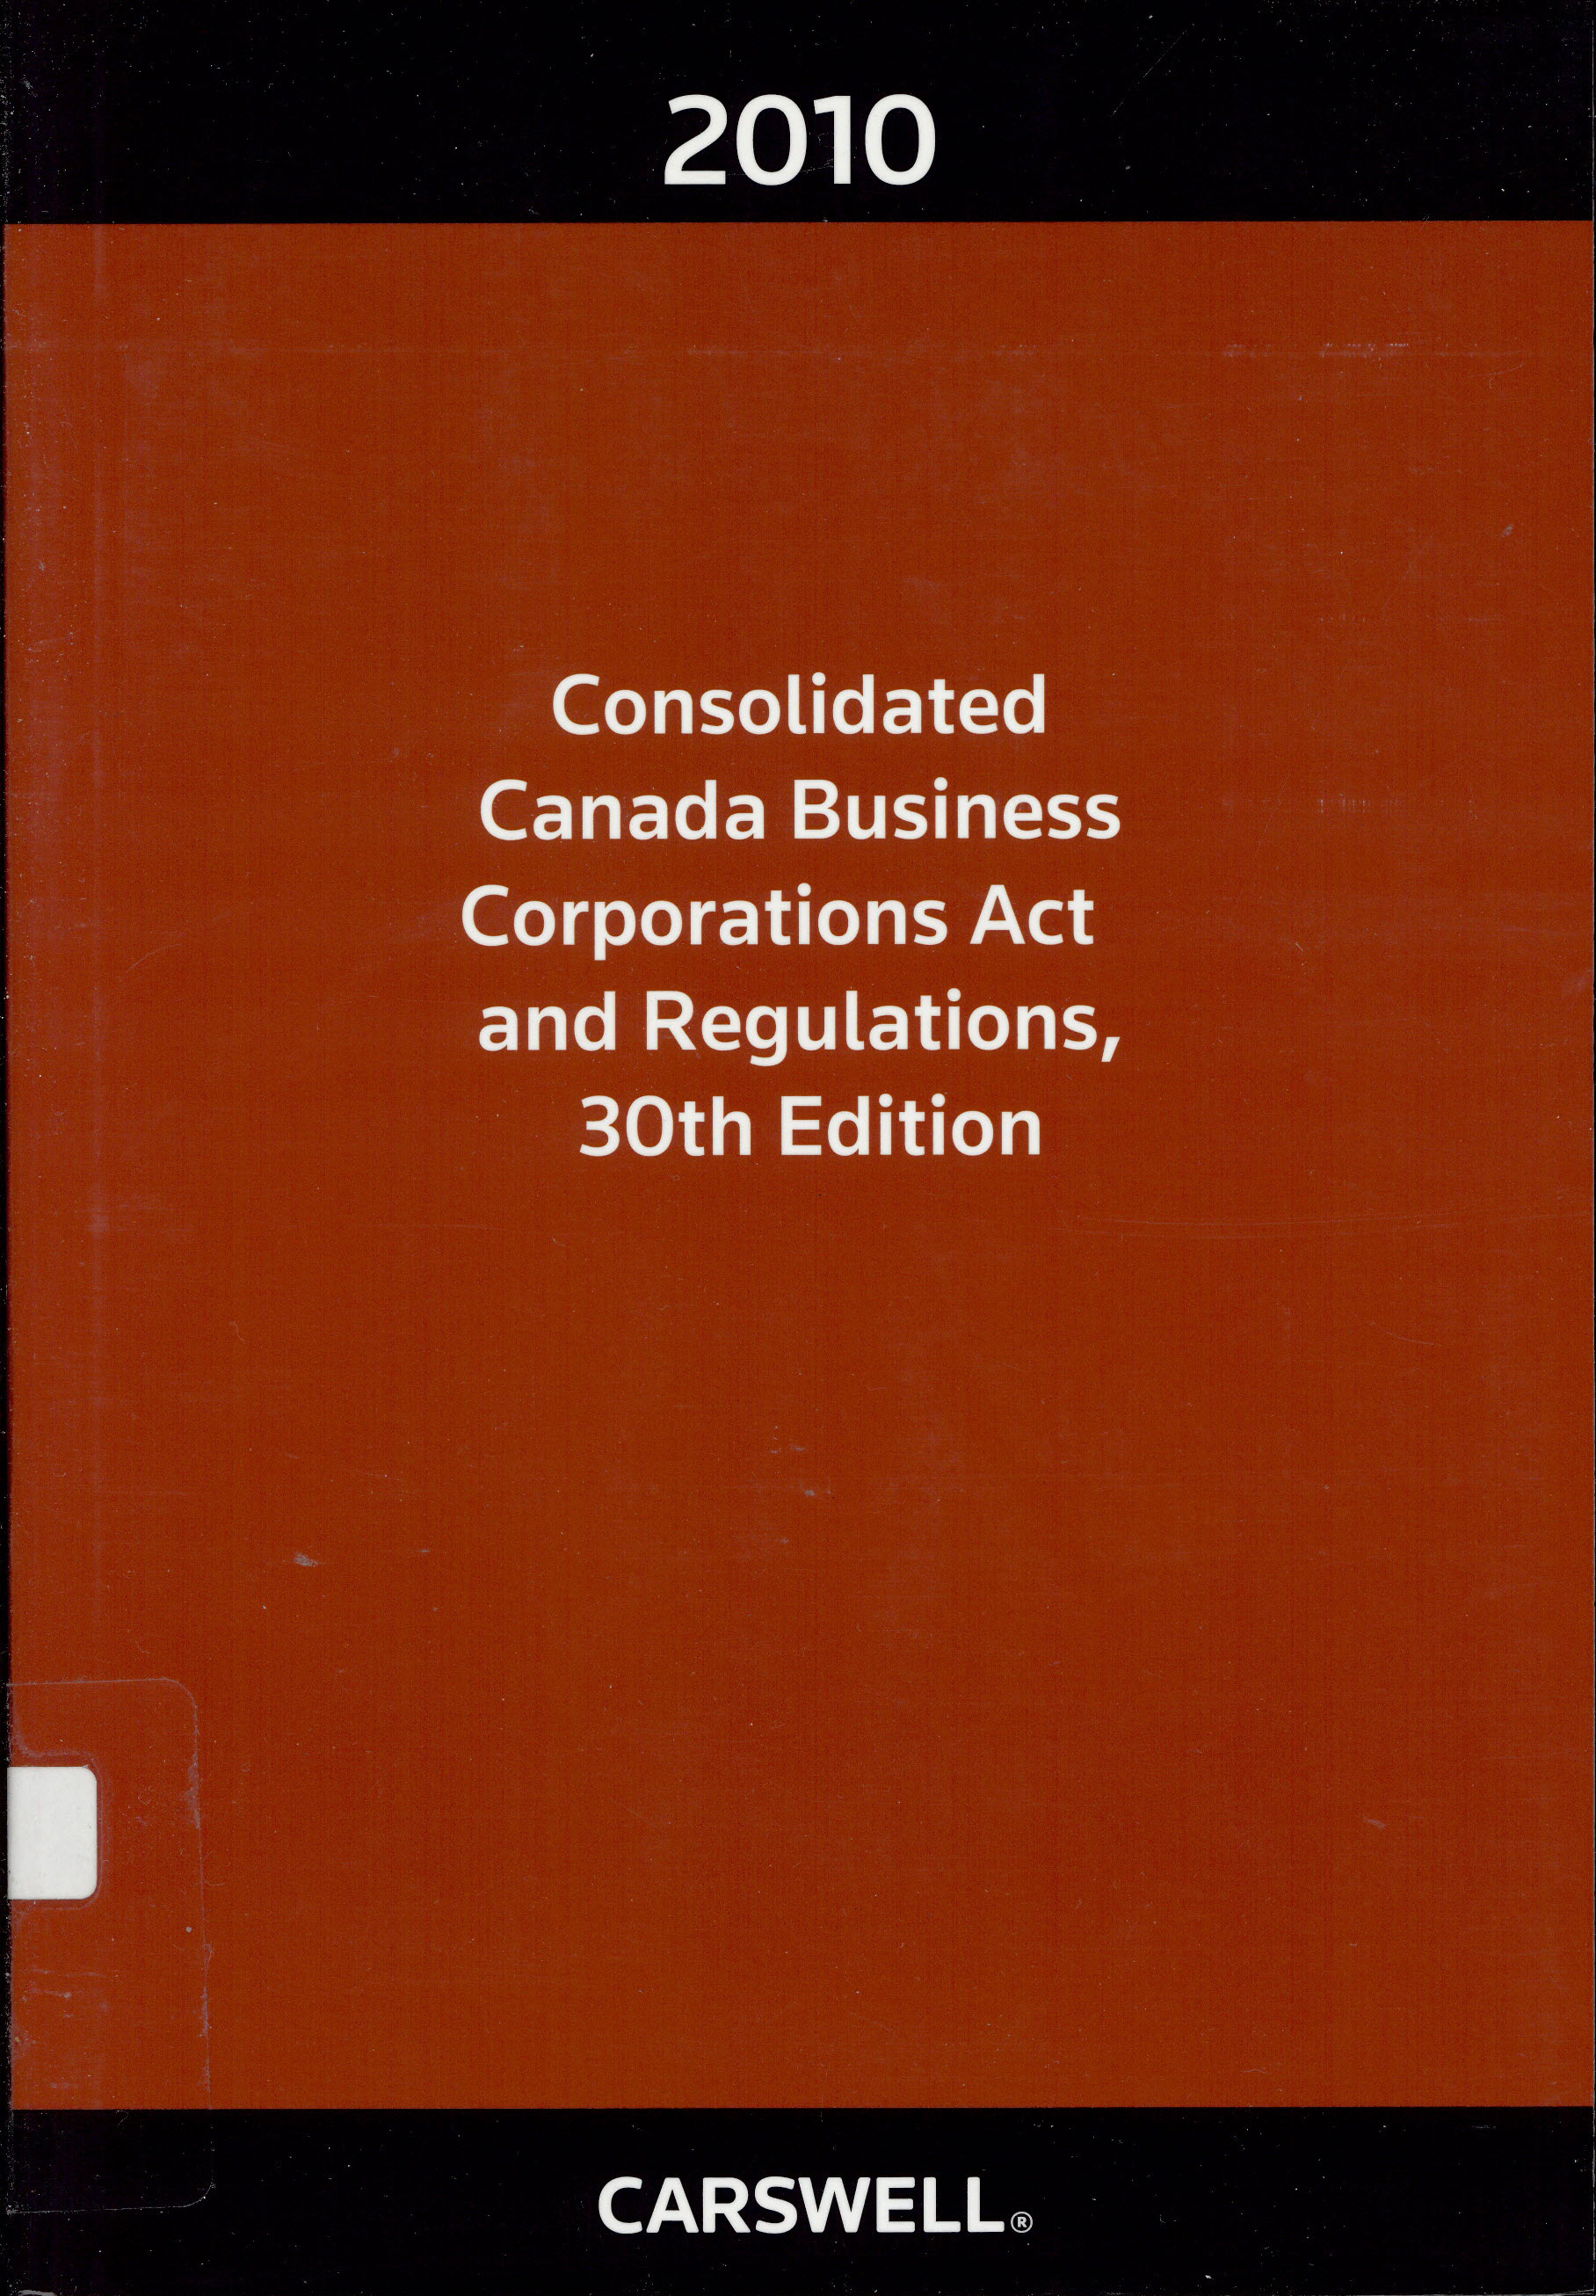 Consolidated Canada Business Corporations Act and regulations